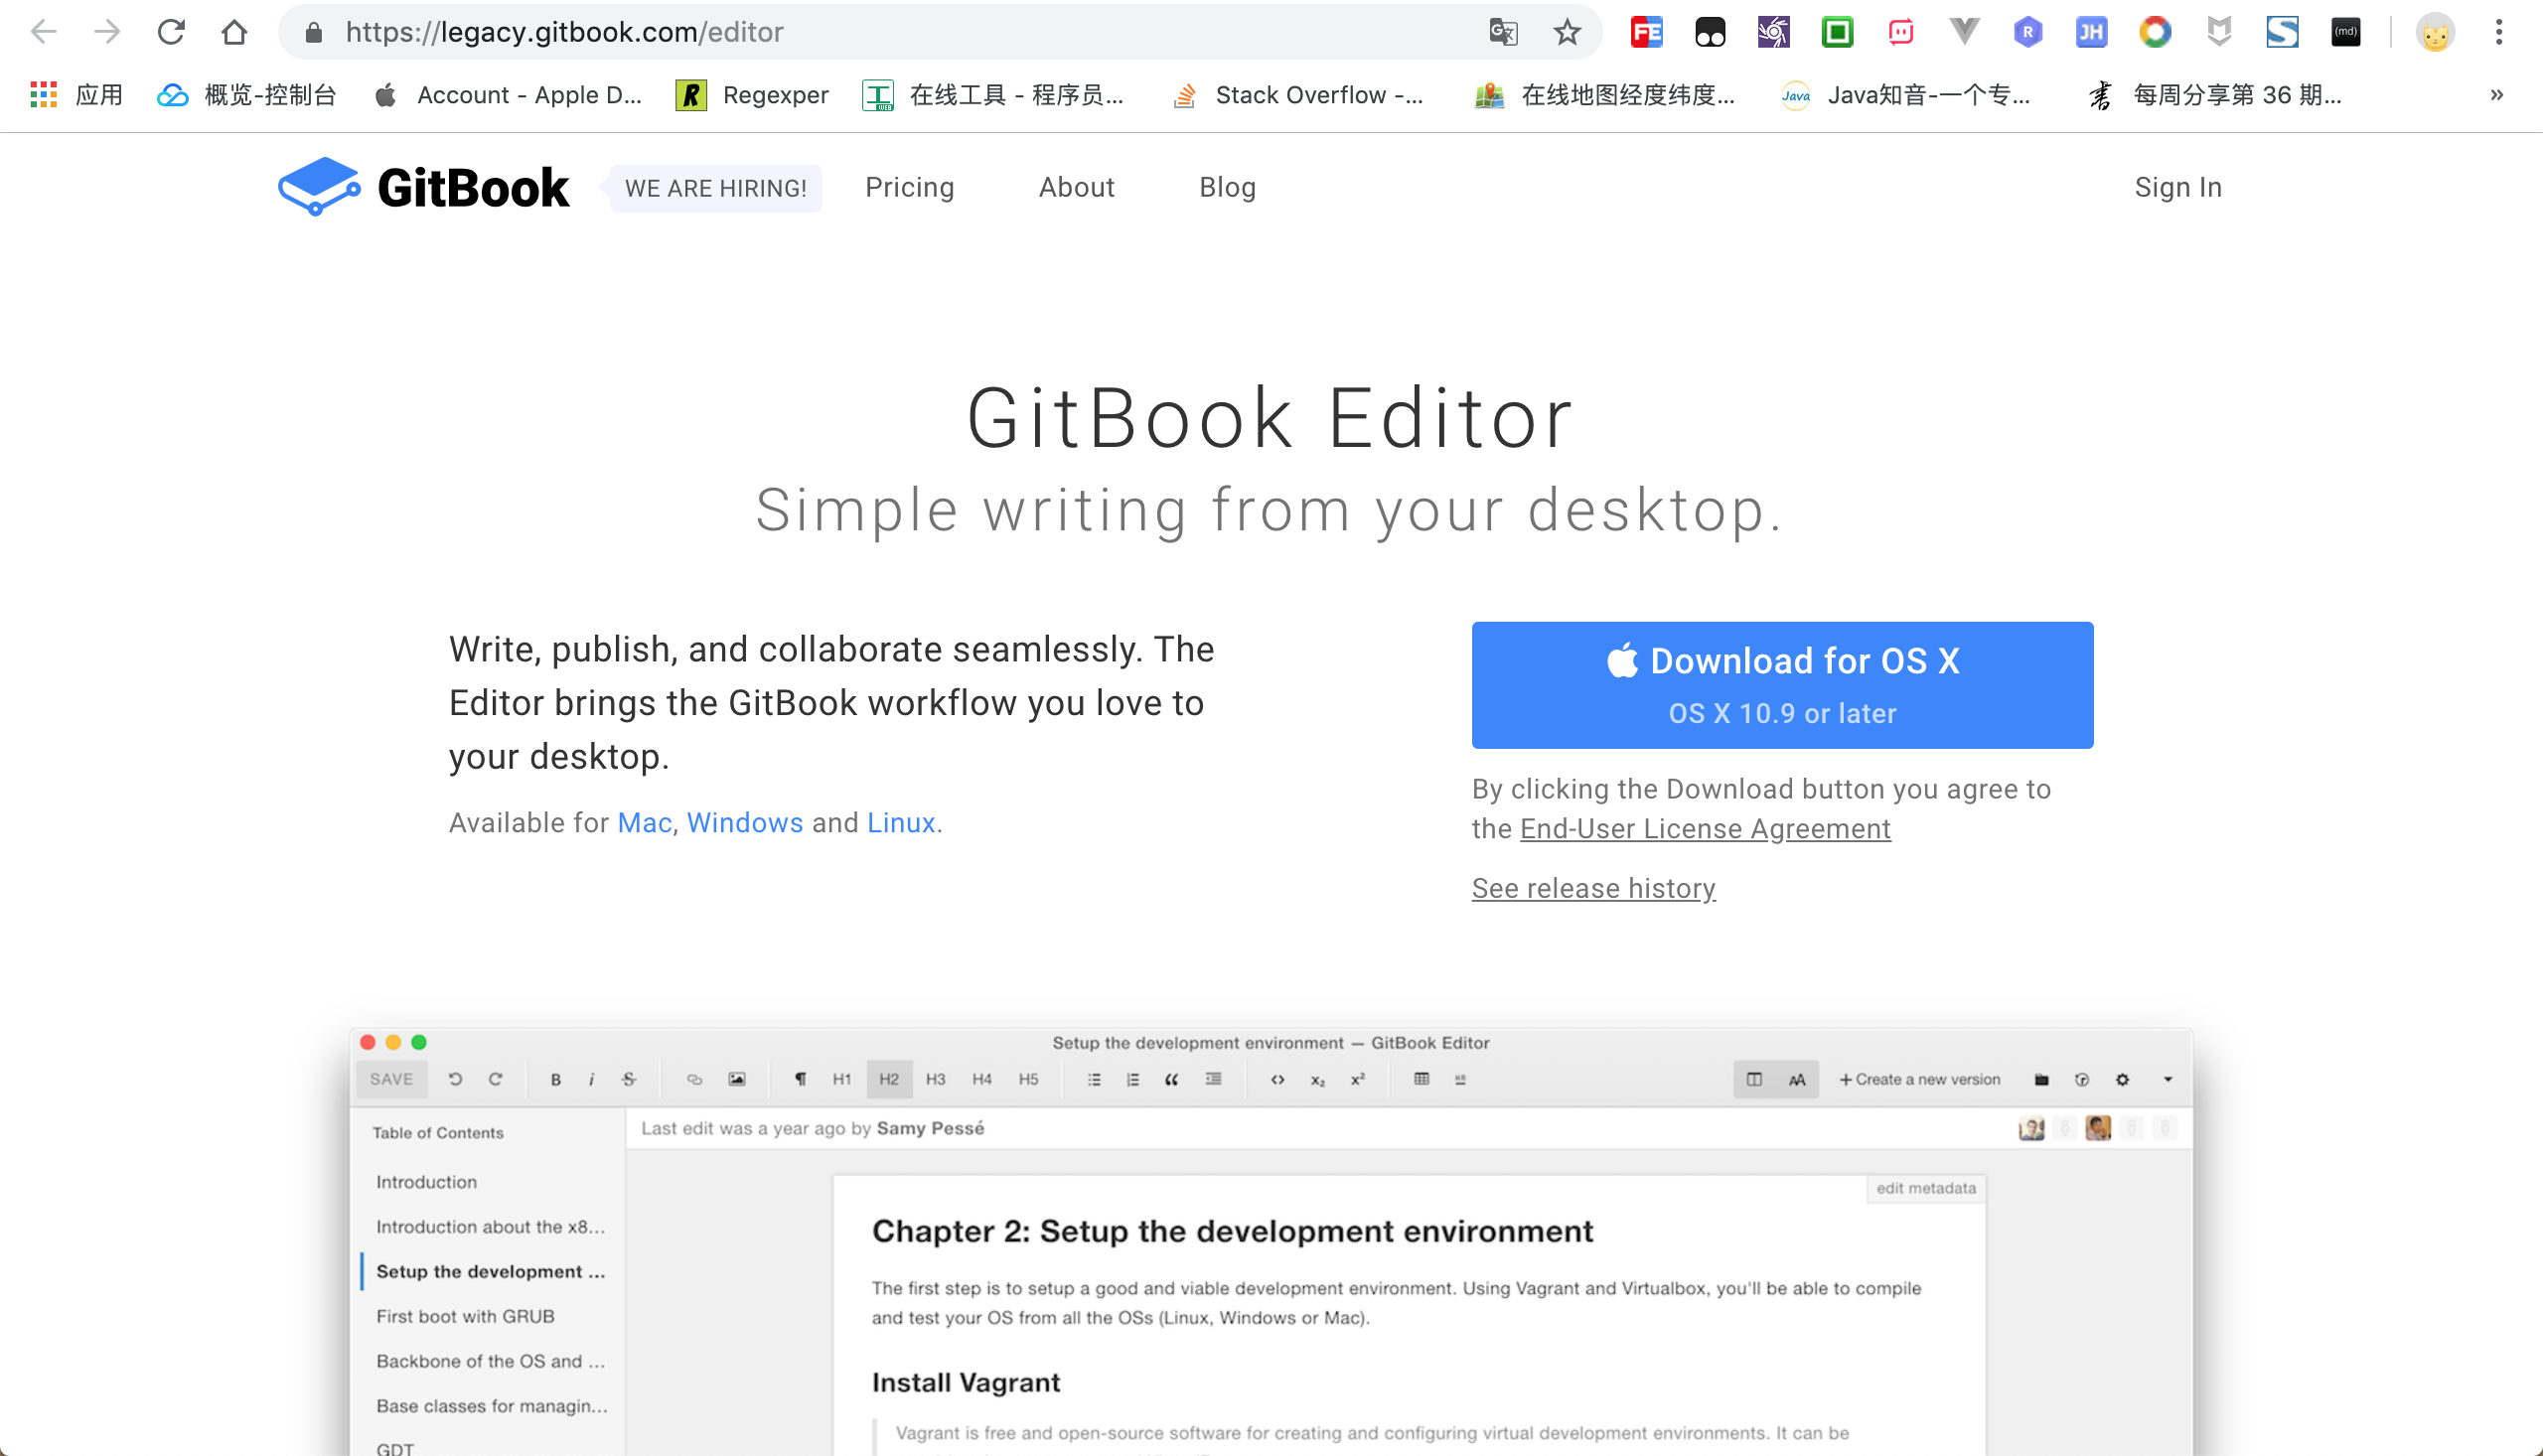 gitbook-editor-preview.png